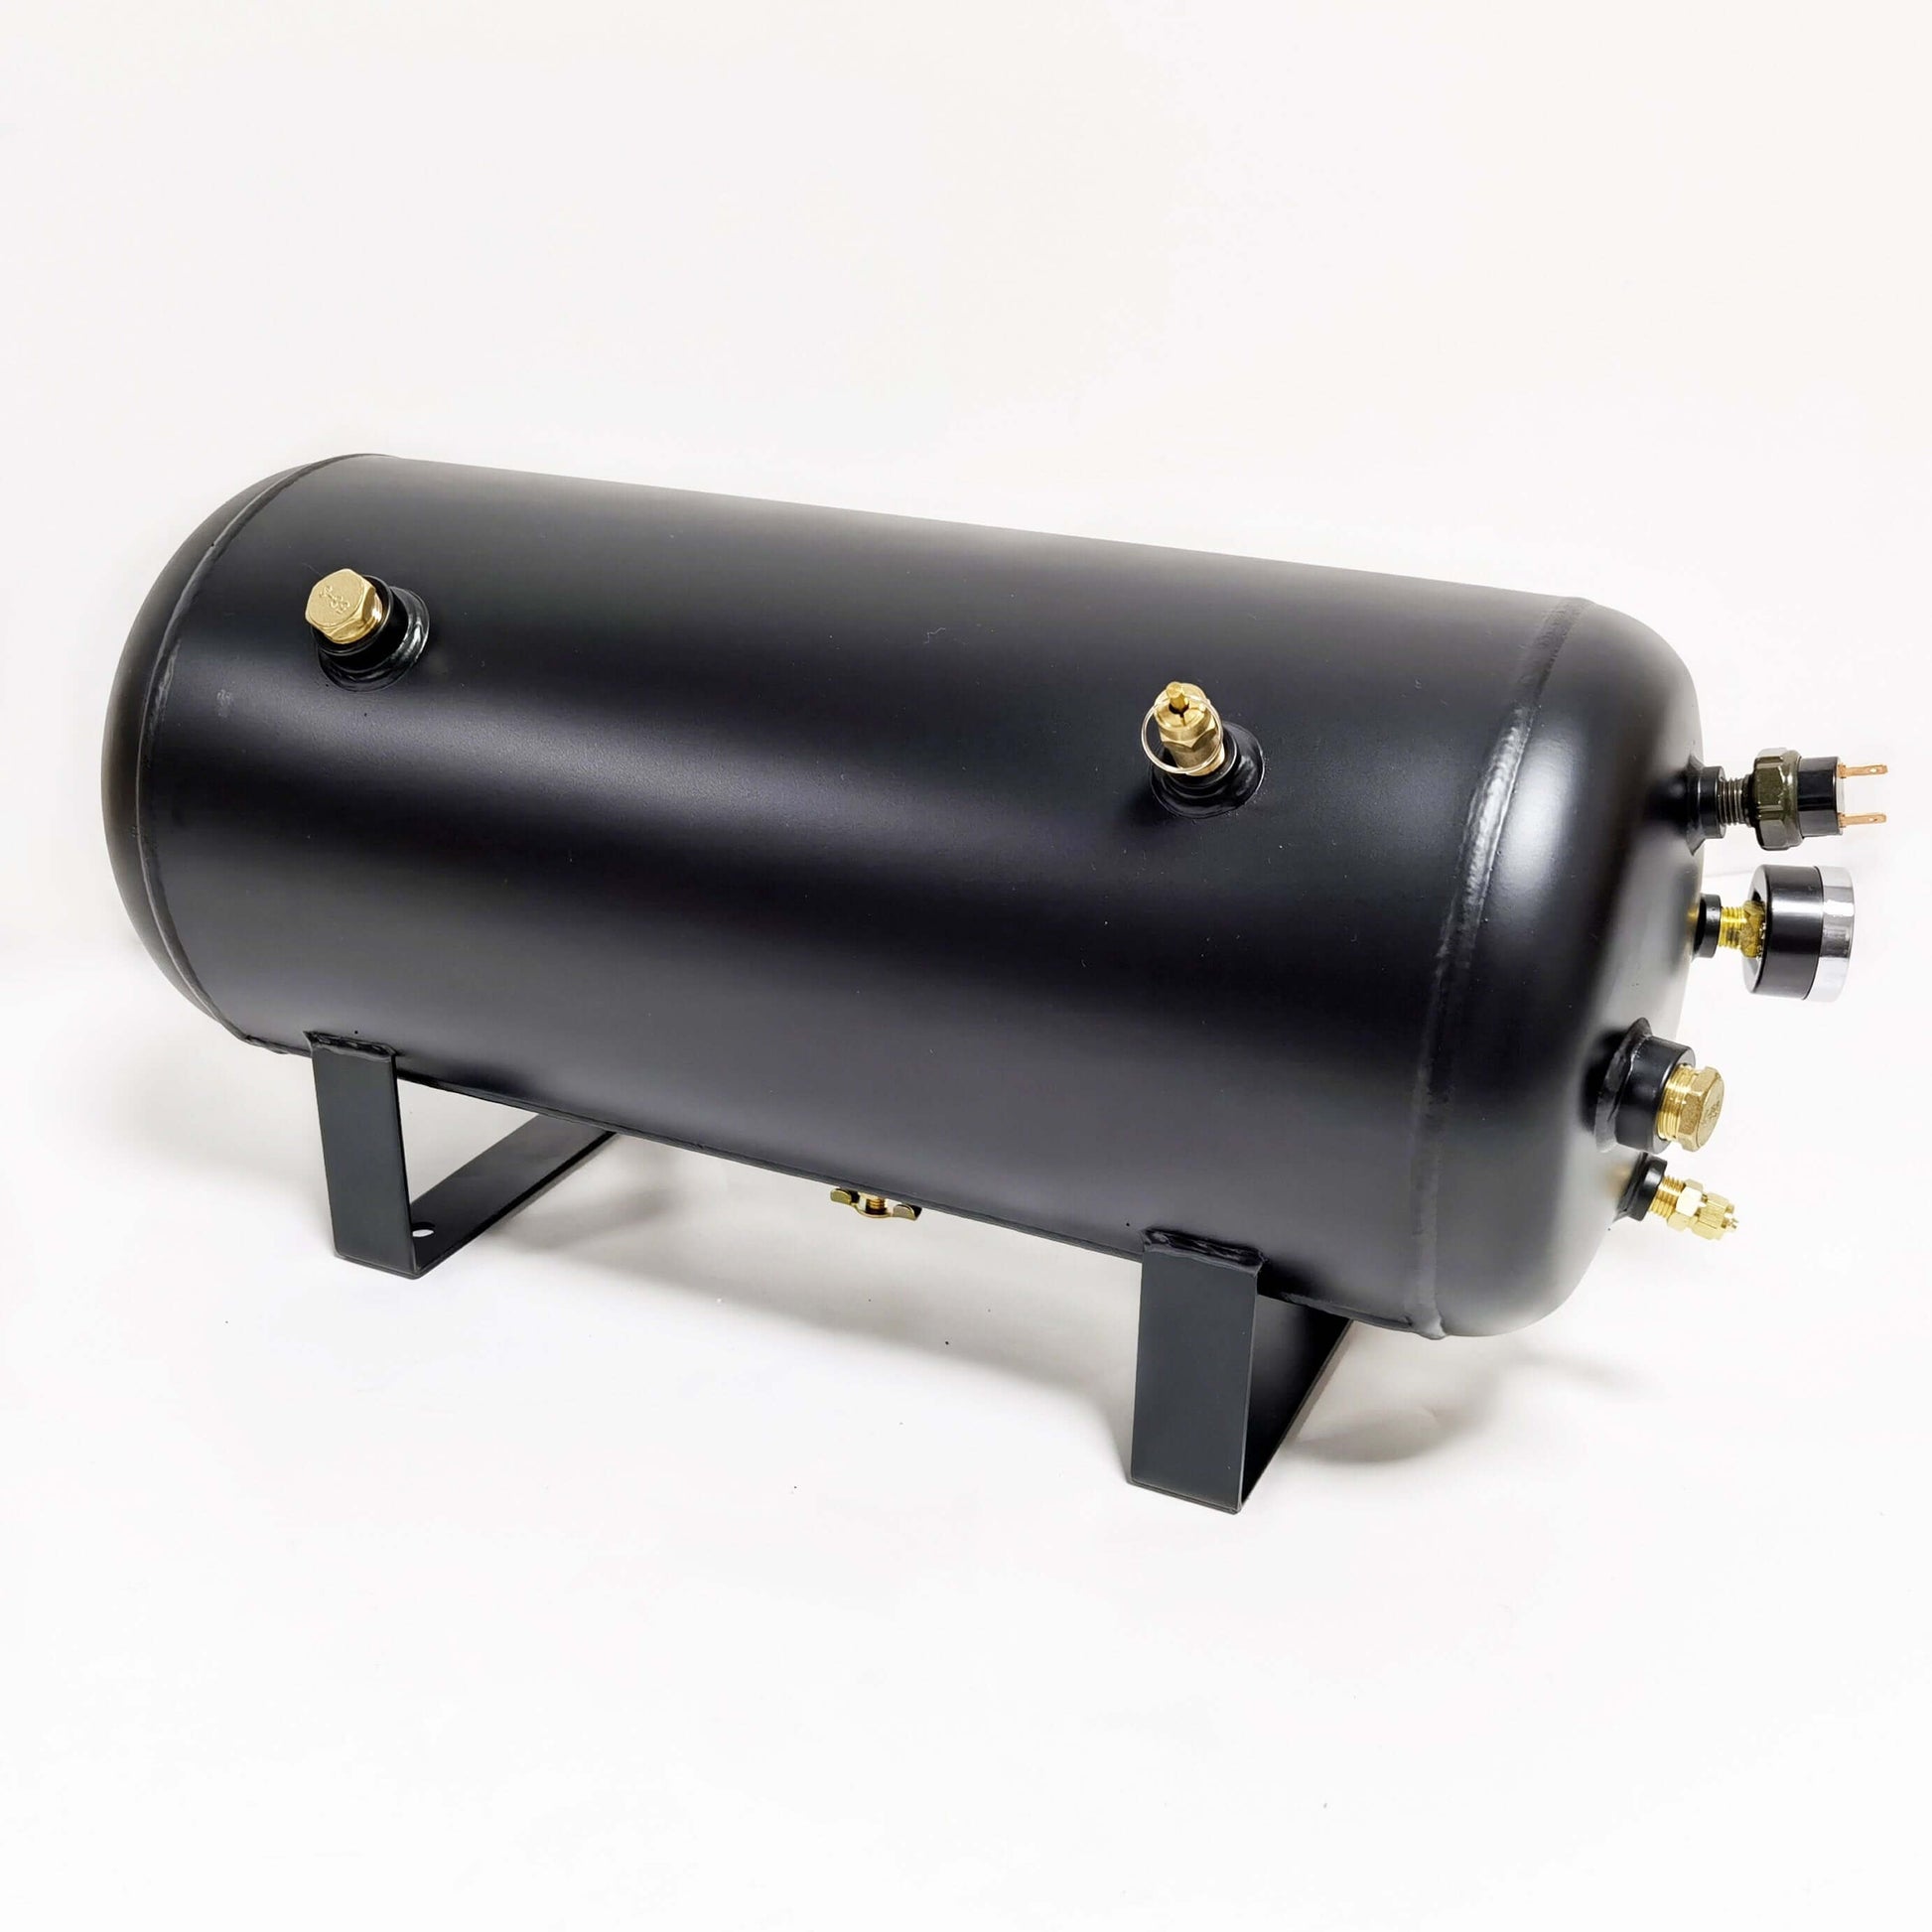 [UNIQUE OFFER] Hurricane 5Gal Train Horn Kit 10-Second Honk Time 